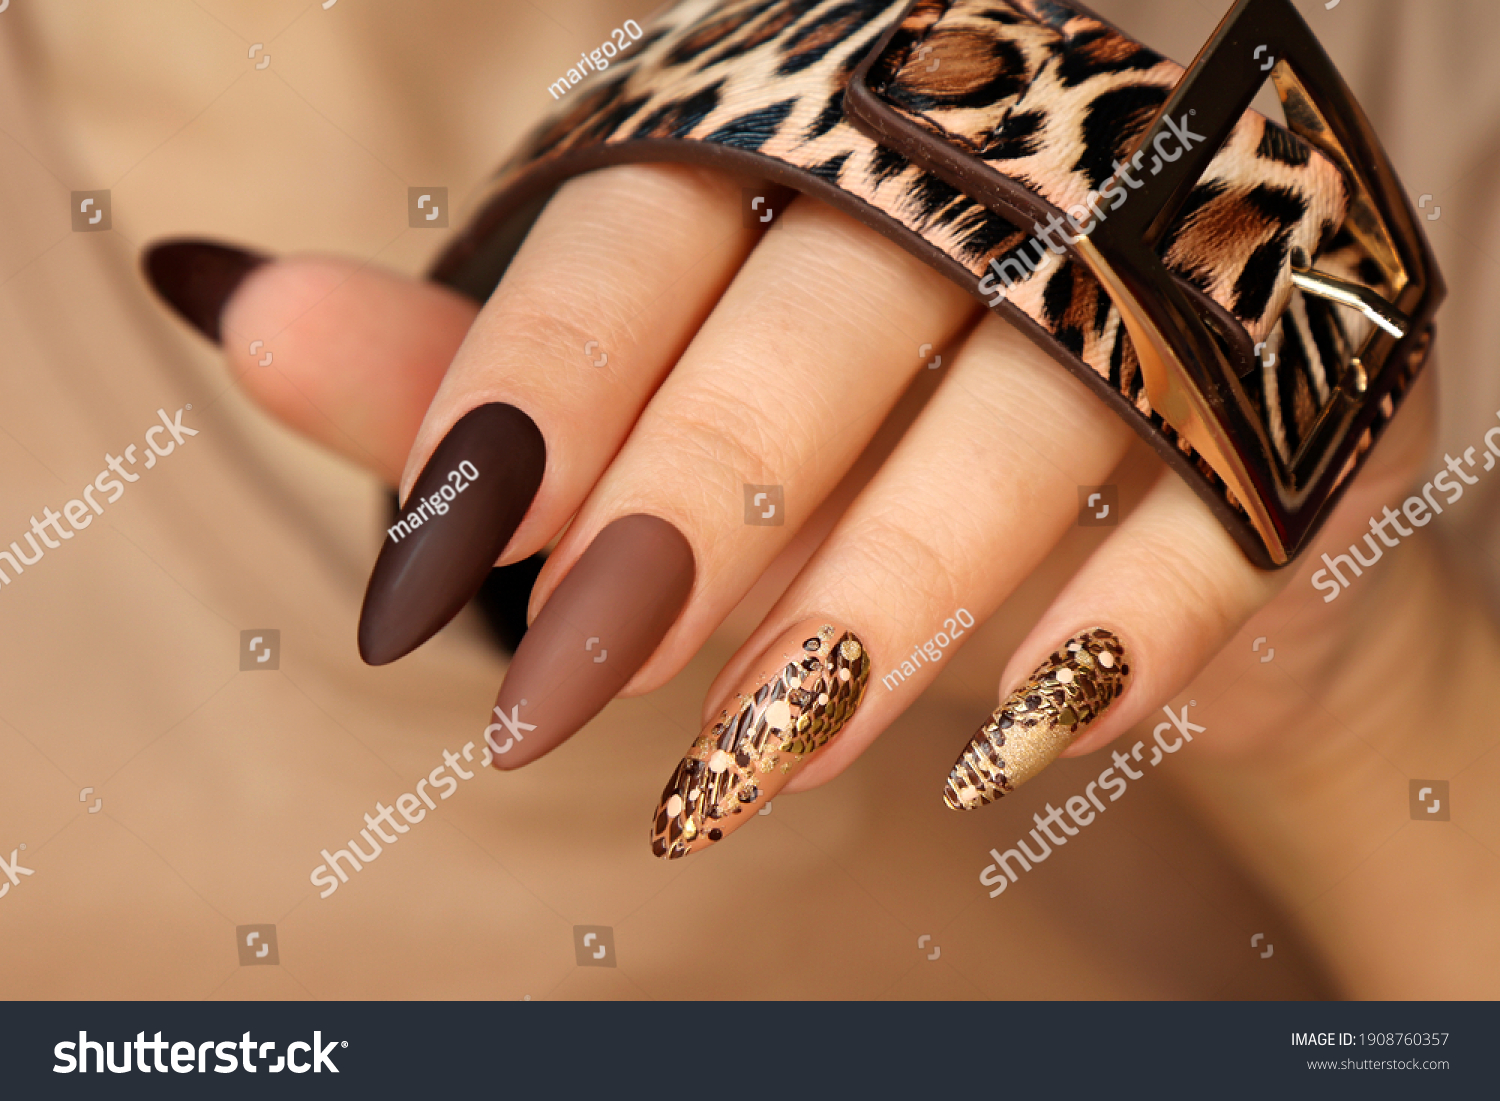 Luxurious multicolored manicure with animal design on long nails. #1908760357